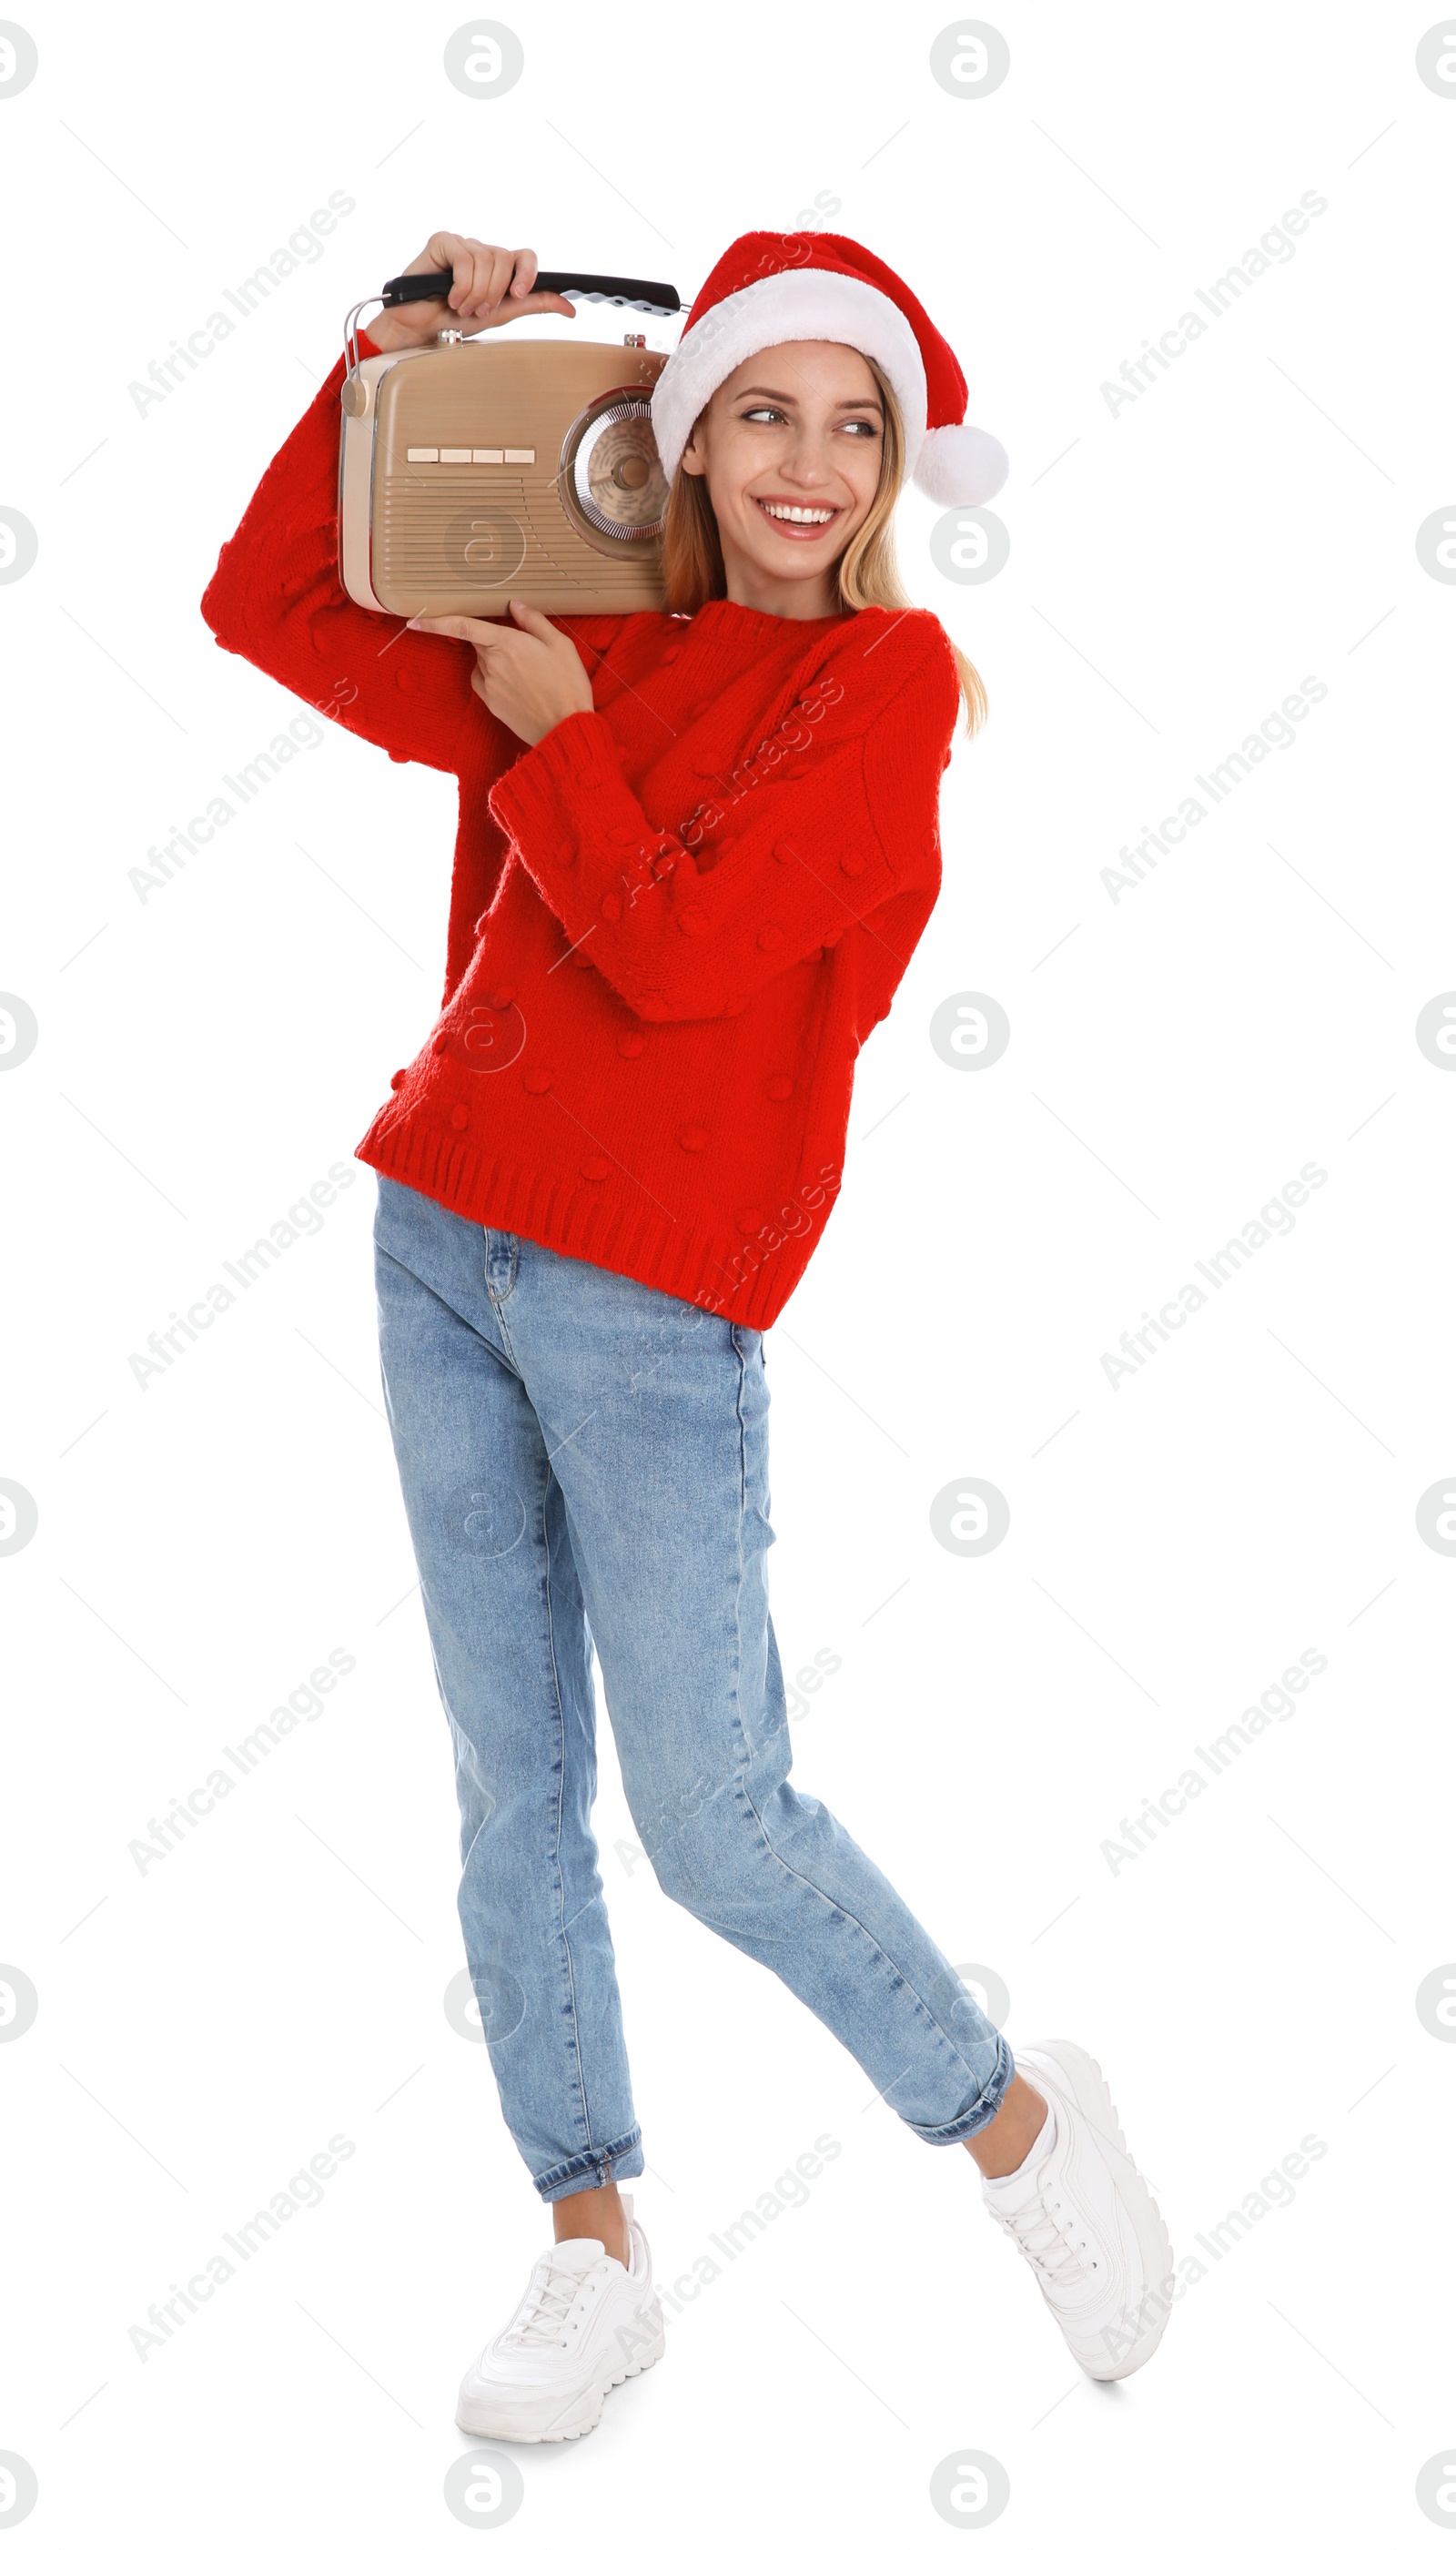 Photo of Happy woman with vintage radio on white background. Christmas music